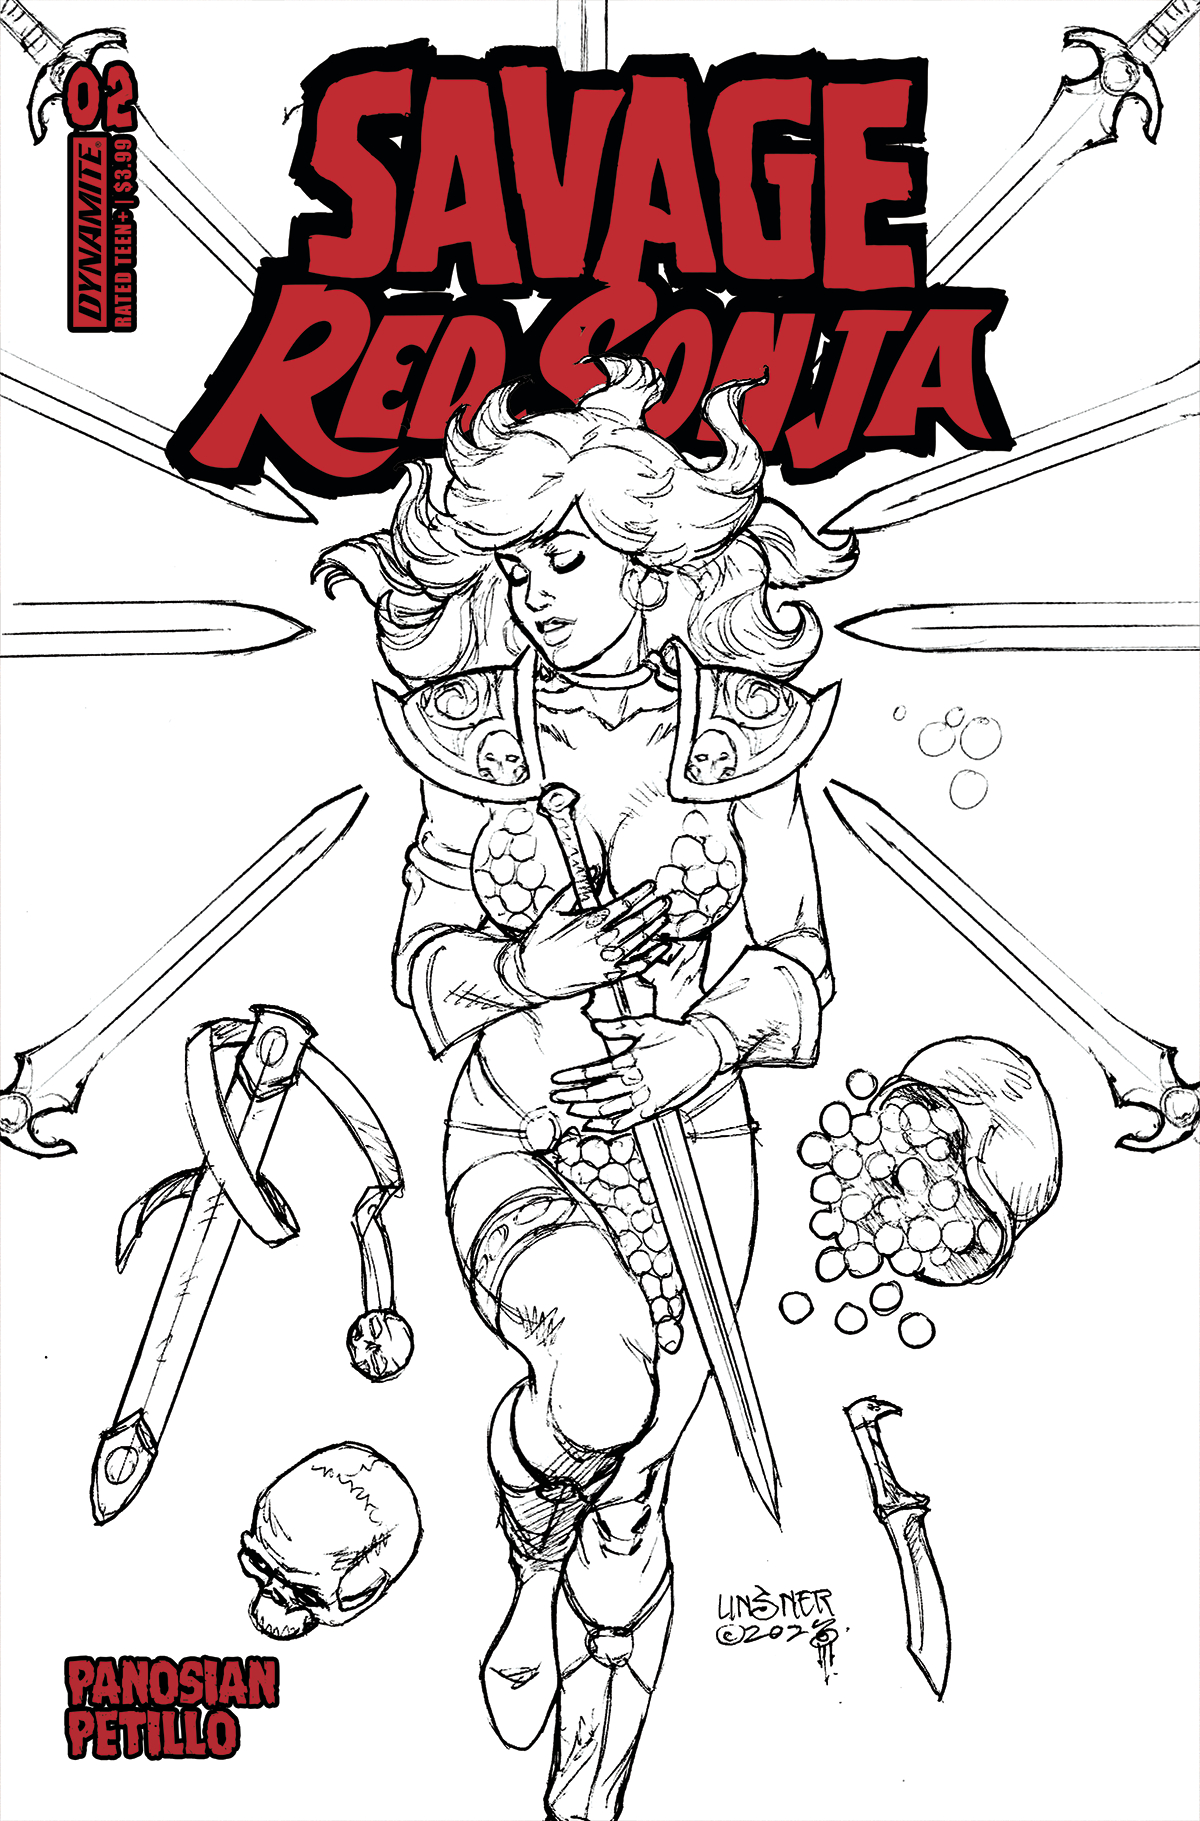 Savage Red Sonja #2 Cover E 1 for 10 Incentive Linsner Line Art